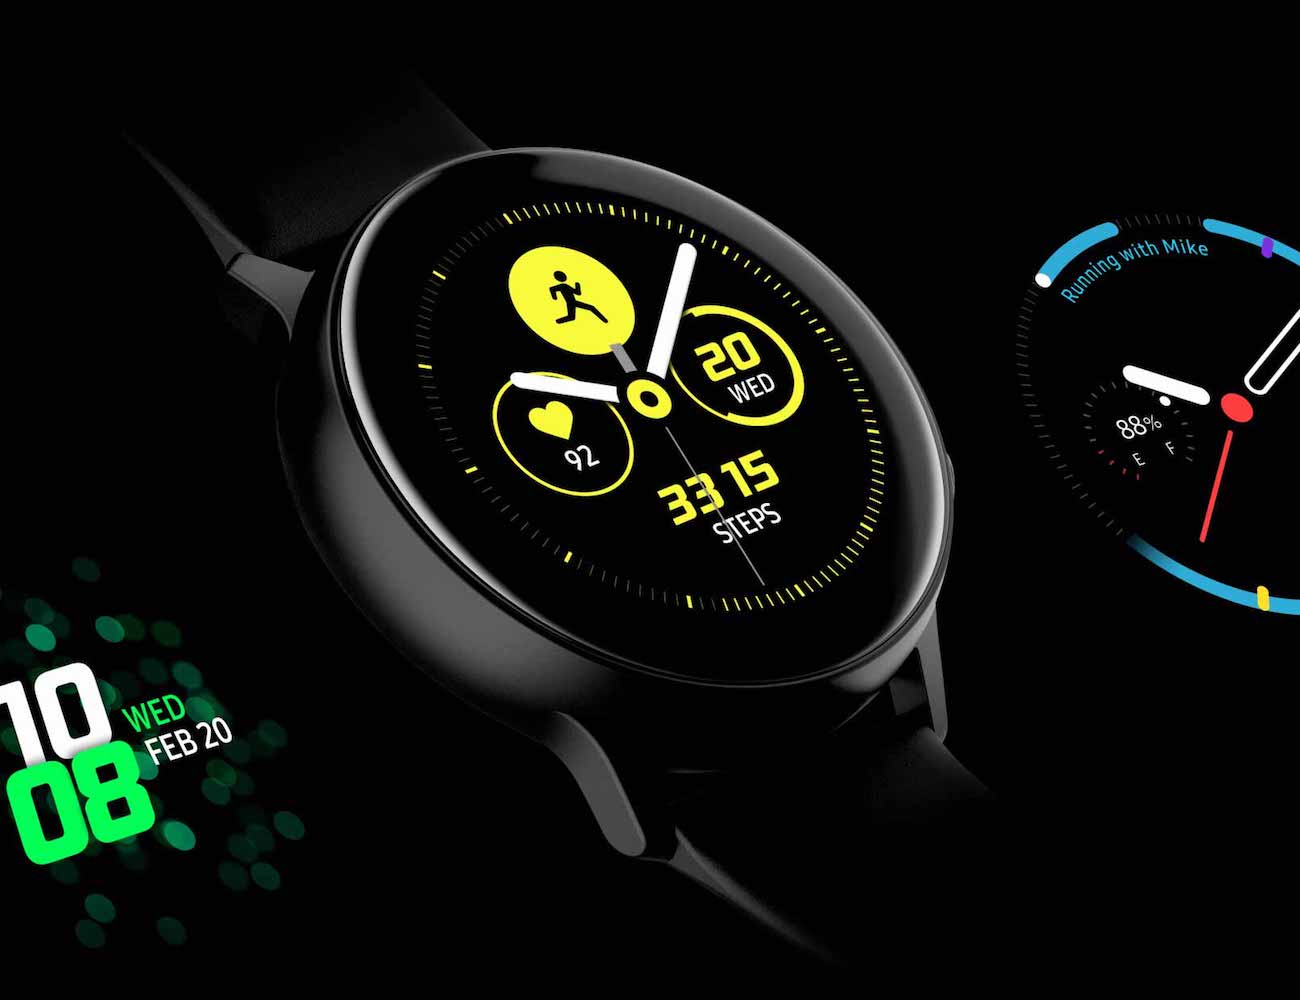 Smart watch Samsung Galaxy Watch Active - pros and cons